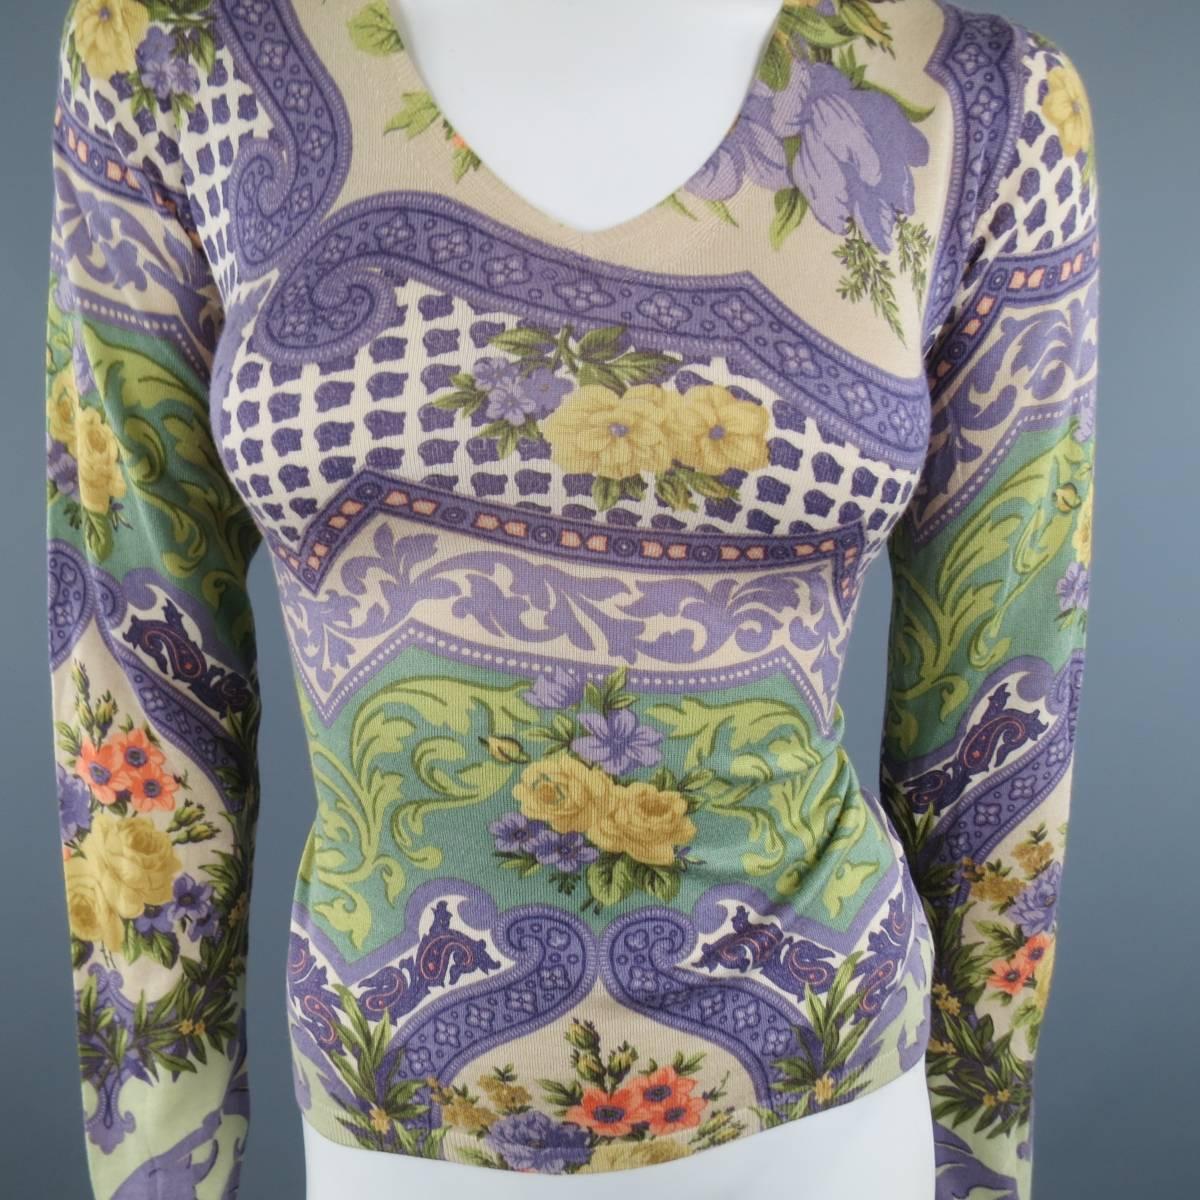 ETRO V neck pullover sweater comes in a light weight beige silk cashmere knit with allover purple and green abstract brocade floral  and paisley print. Care tag removed. Small hole in shoulder. Made in Italy.
 
Fair Pre-Owned Condition.
Marked: 42
